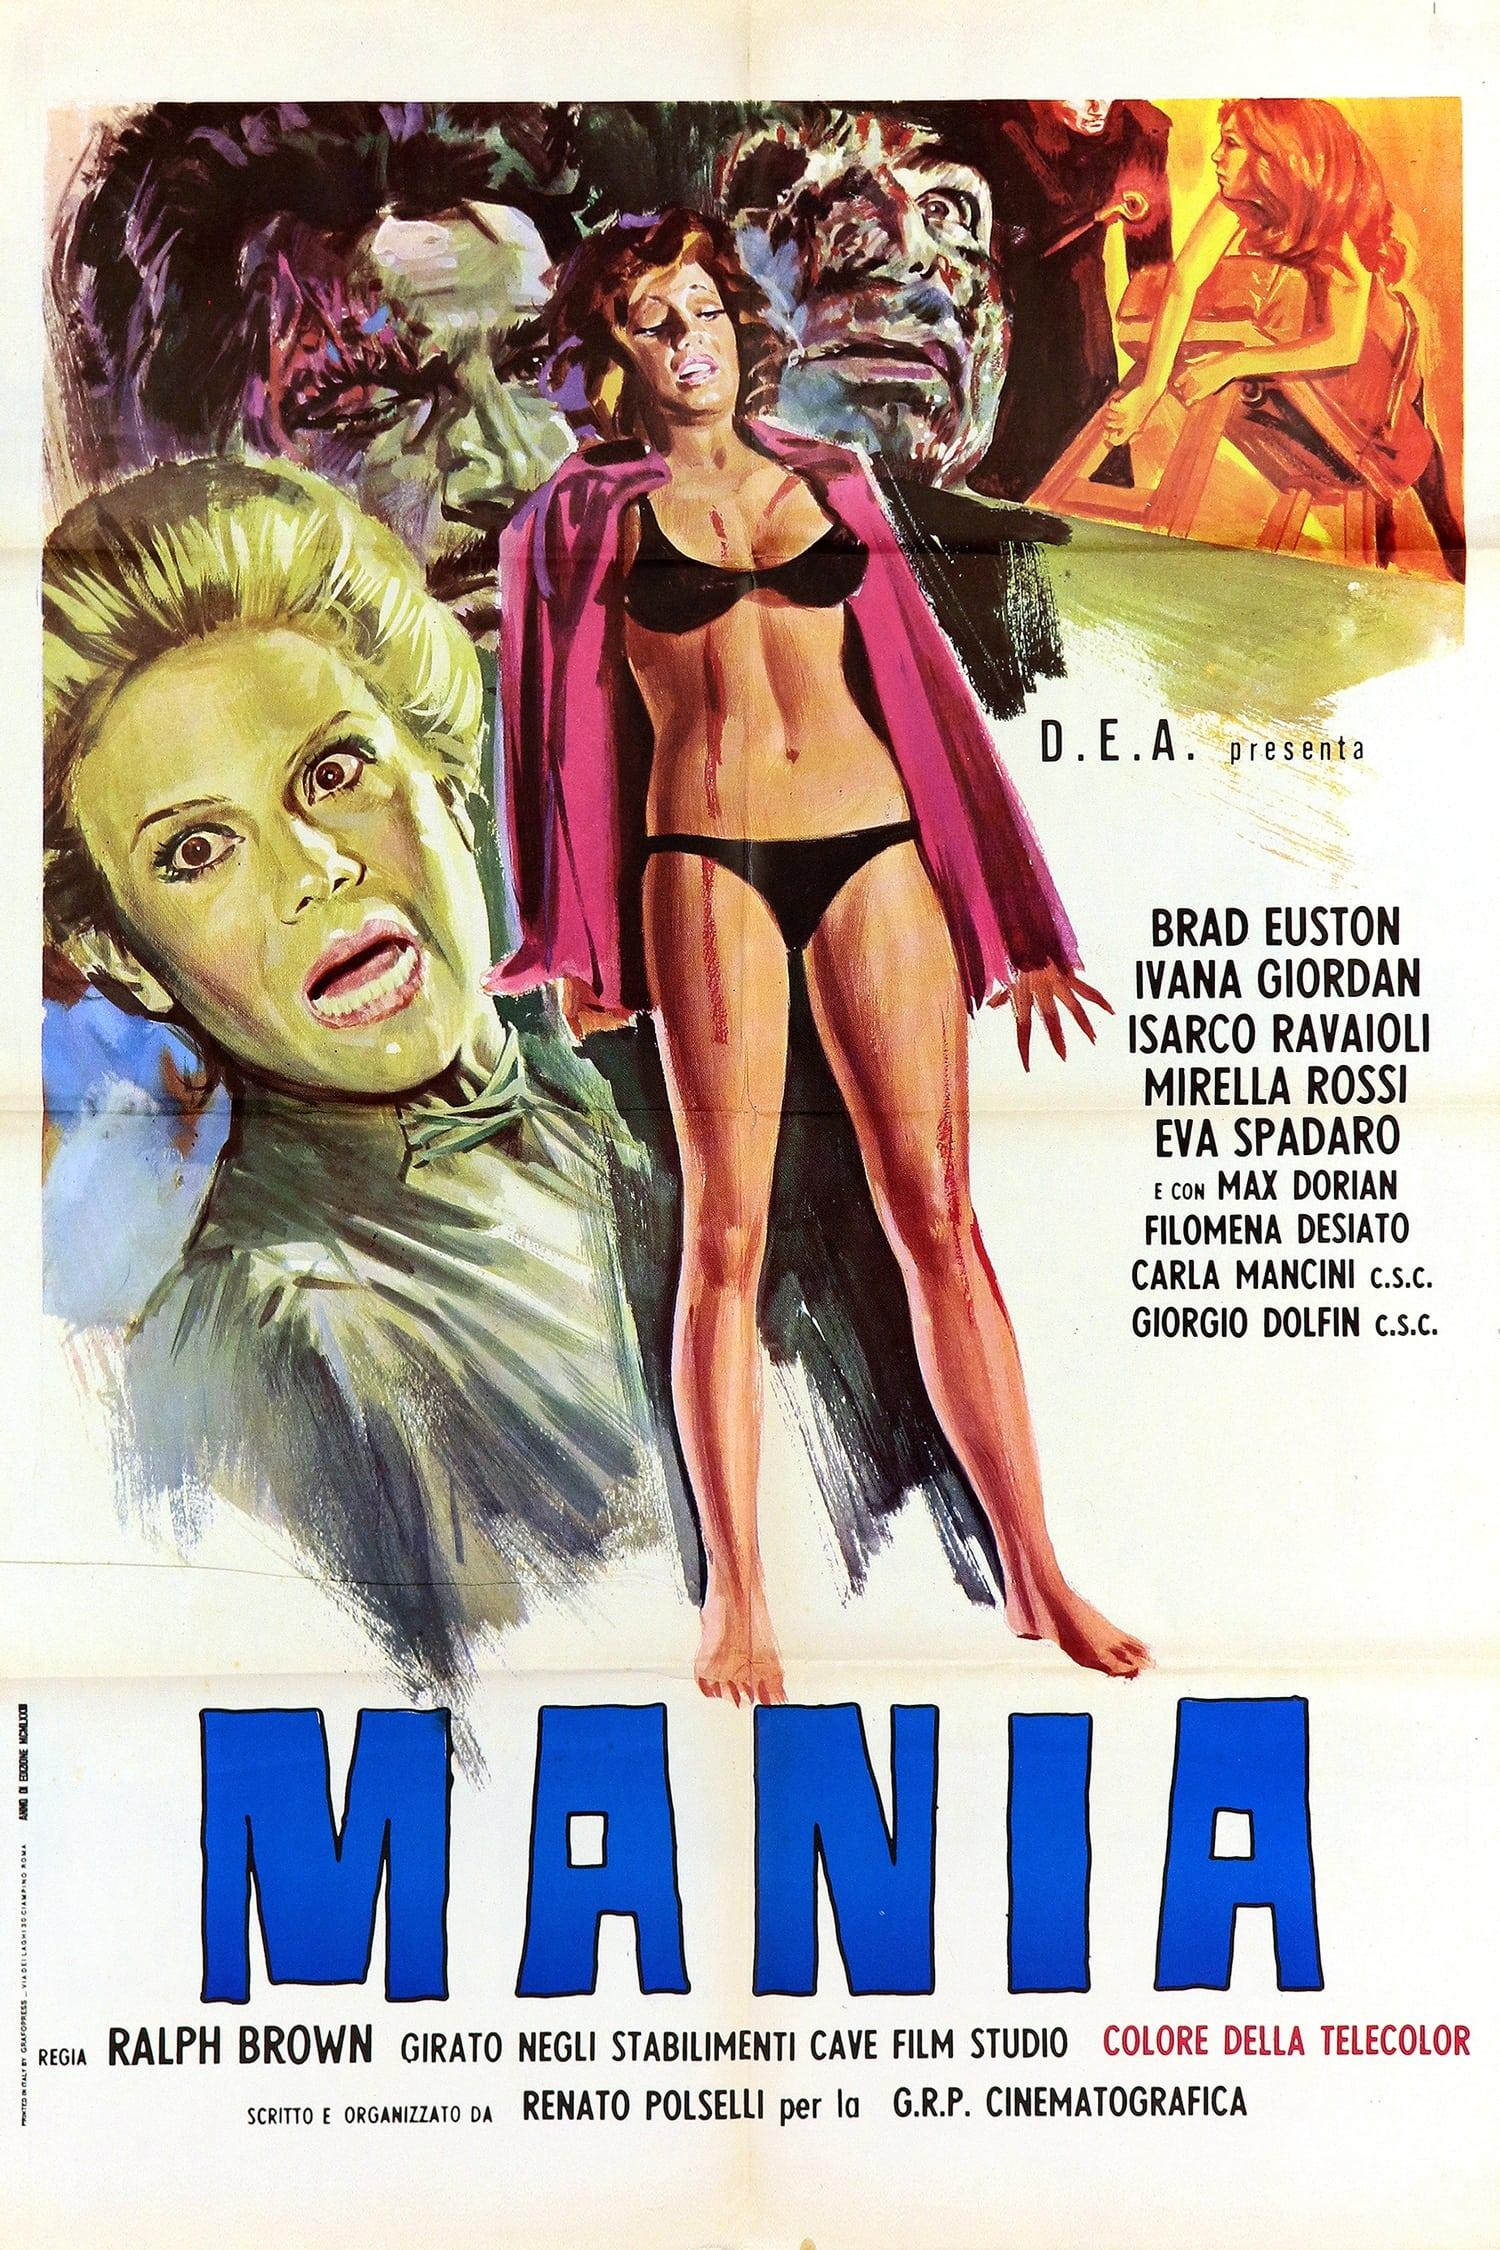 Mania poster